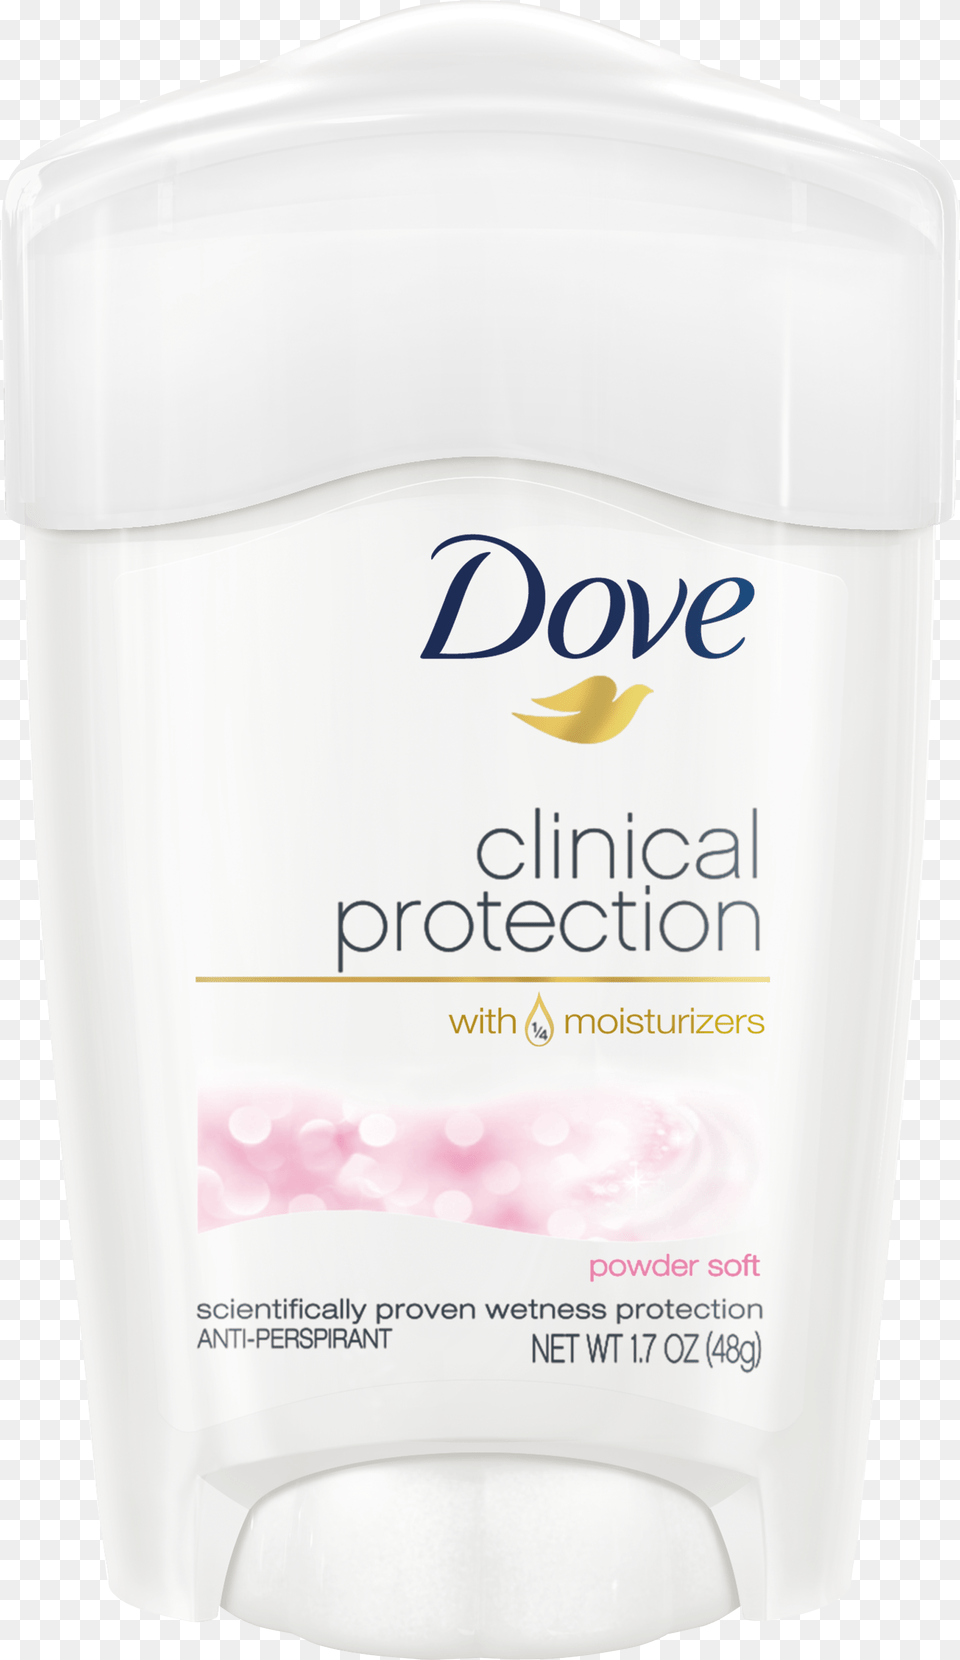 Dove Clinical Protection Antiperspirant Dove Clinical Protection With 1 4 Moisturizers Png